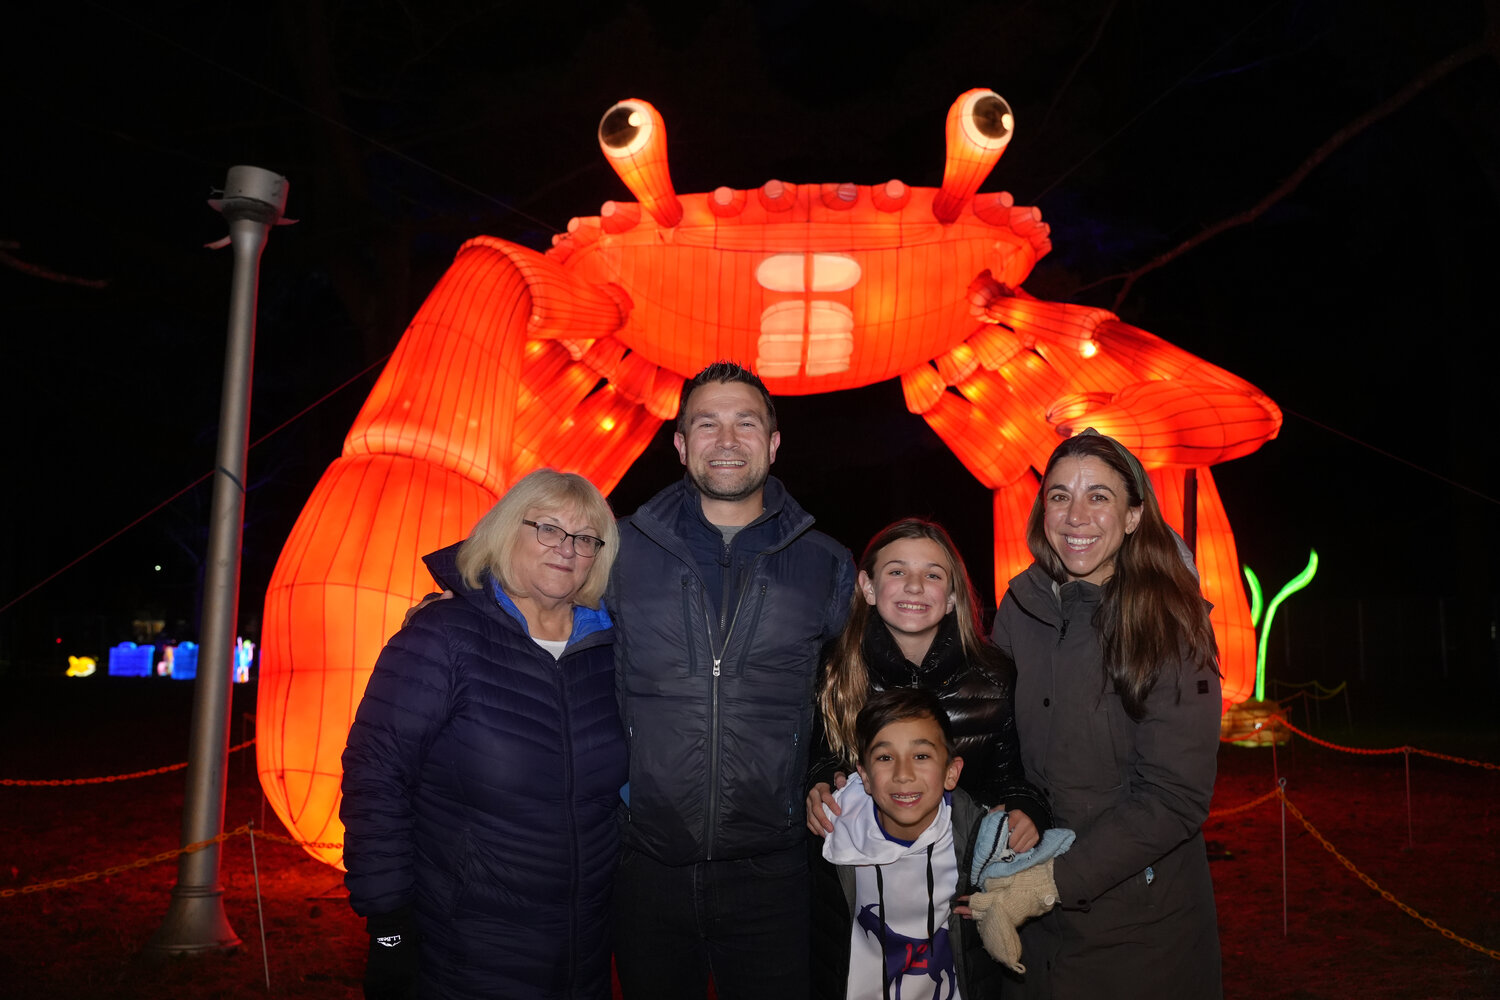 Barbara Rossi, Greg Rossi, Aubrey Rossi, Sam Rossi, and Michele Rossi stopped by the display. Invitations were given to 2,500 Nassau County employees and their families to check out the LuminoCity Festival during a preview day last week.